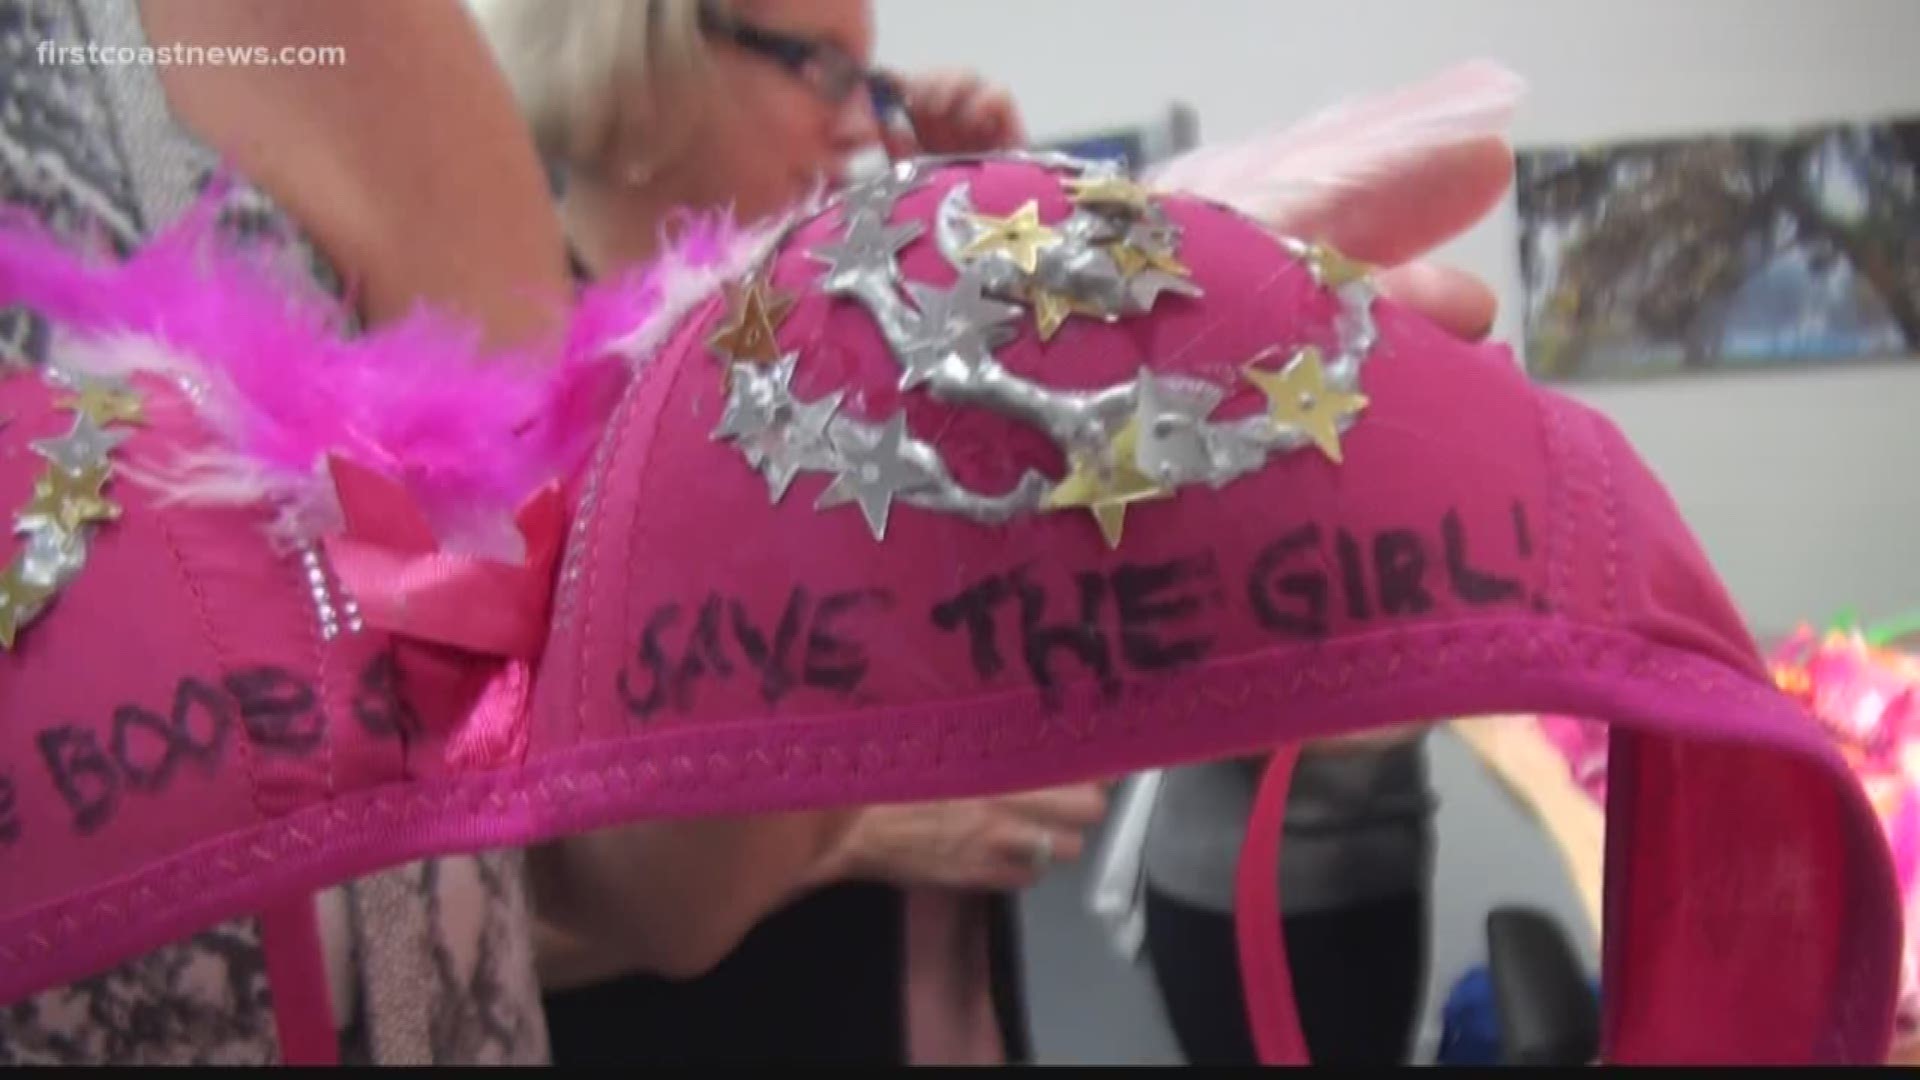 This week's Buddy Bus update includes newly decorated bras and a local gym doing burpees for a great cause.